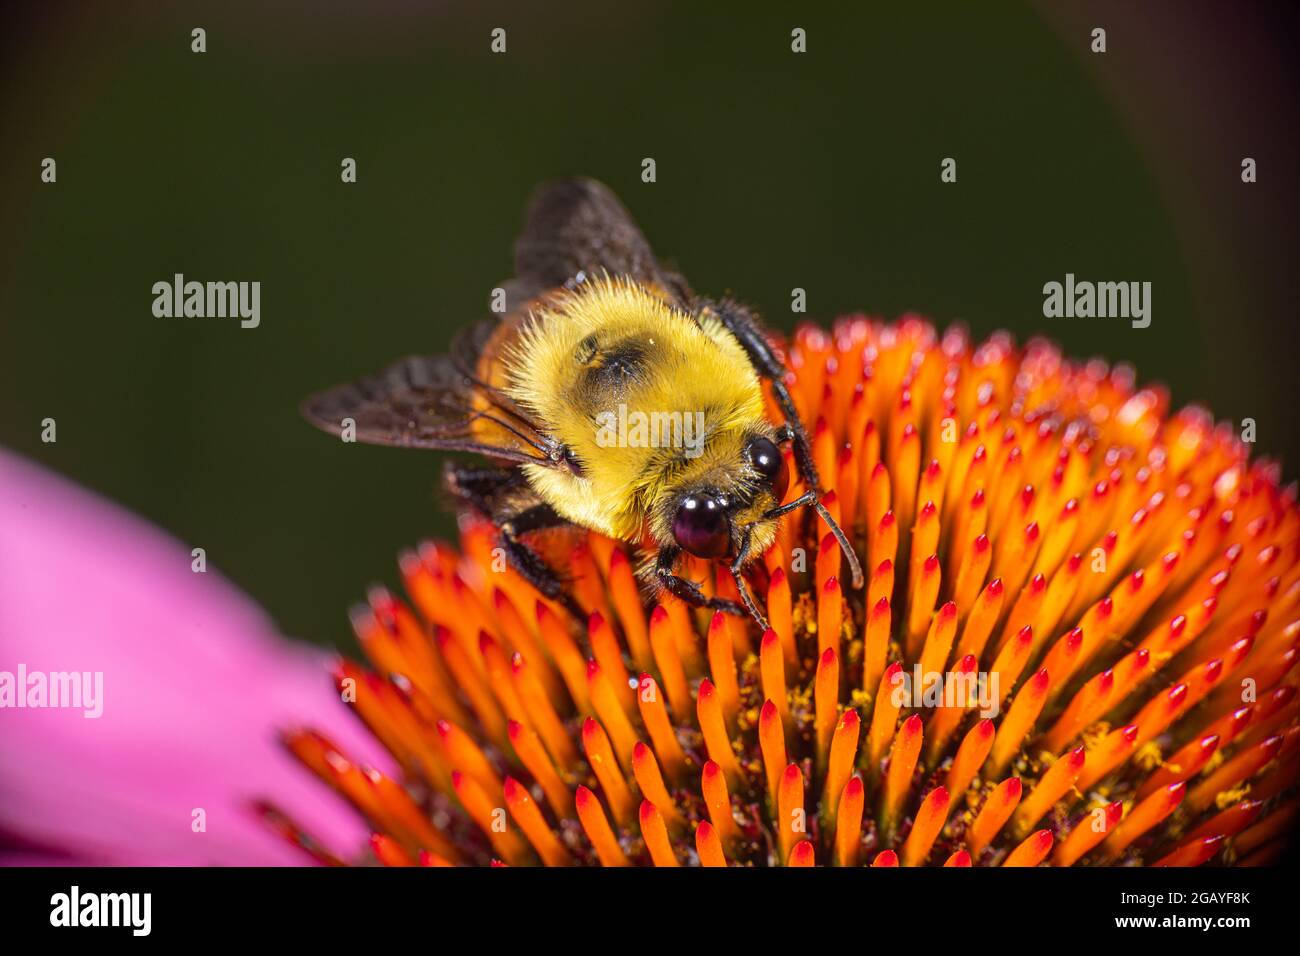 A Brown-Belted Bumble Bee (Bombus griseocollis) collecting pollen from an Echinacea coneflower. Stock Photo